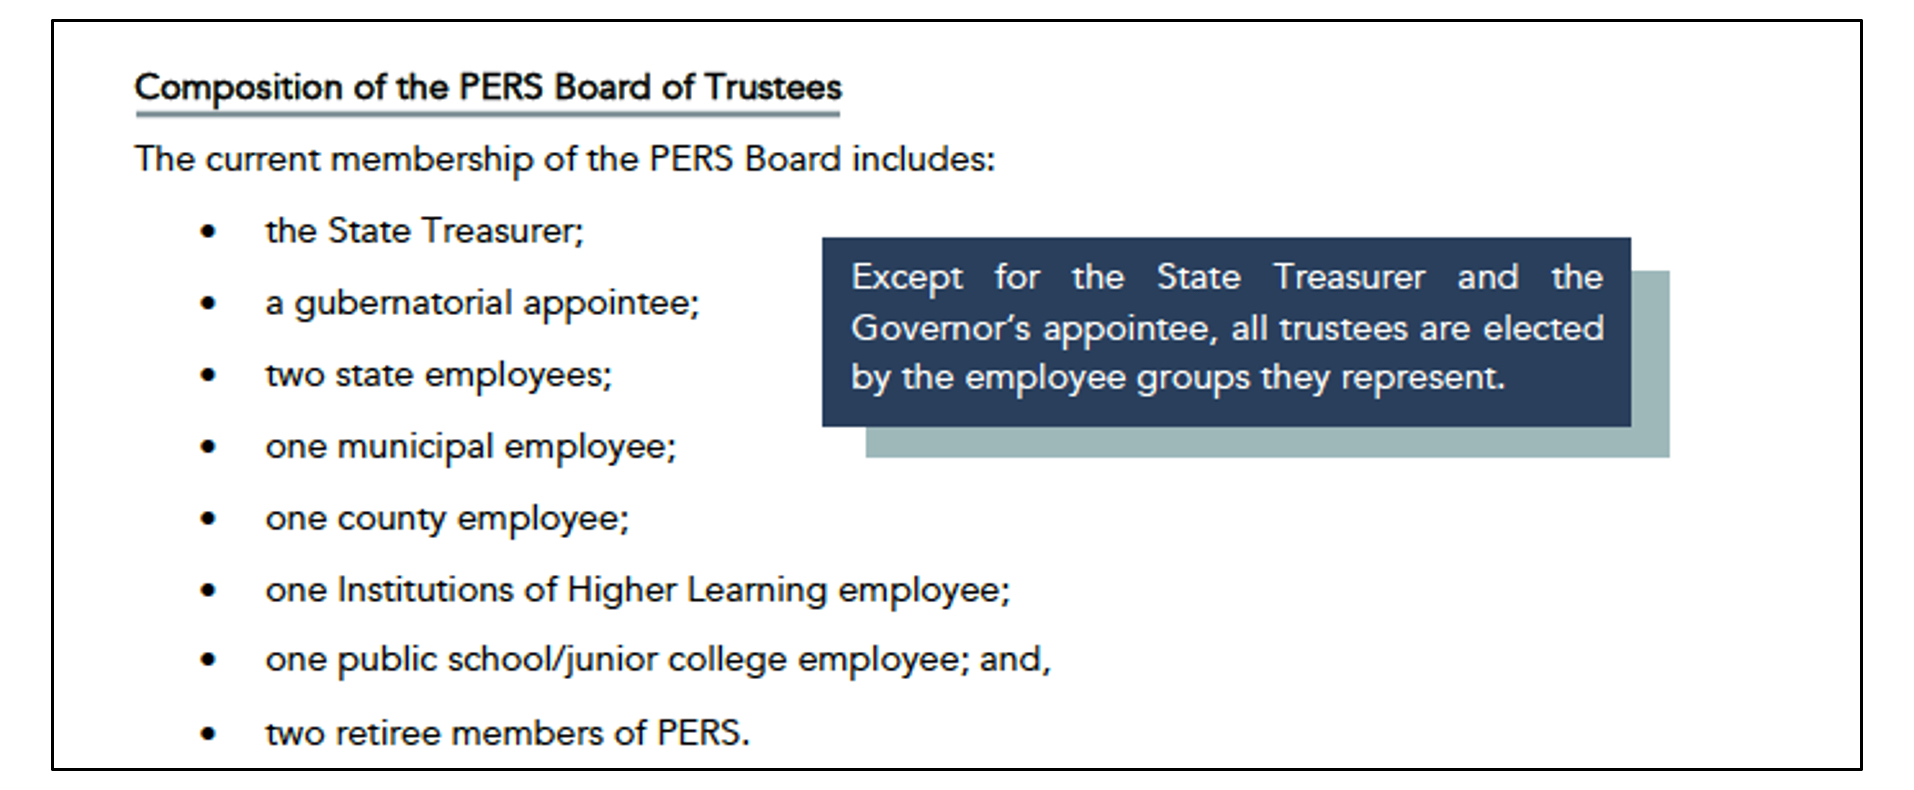 Composition of the PERS Board of Trustees